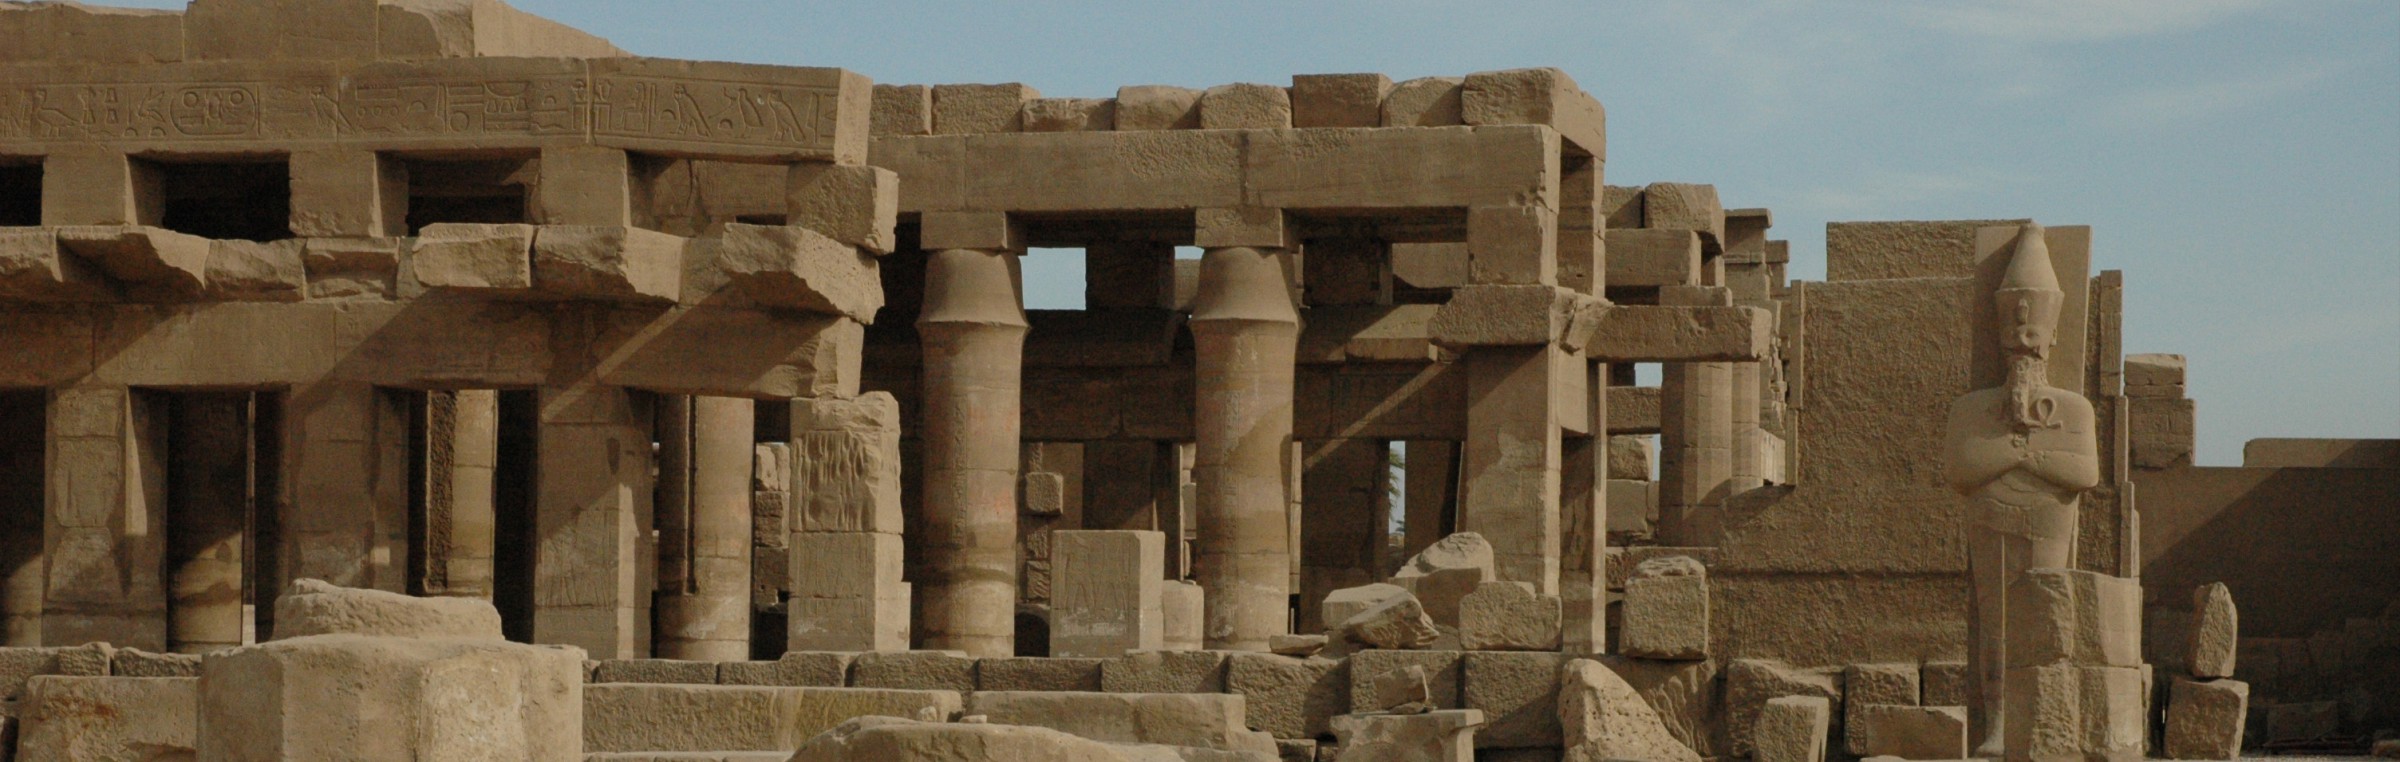 The Karnak Temple Complex - Decayed Temples, Pylons, Chapels and Buildings